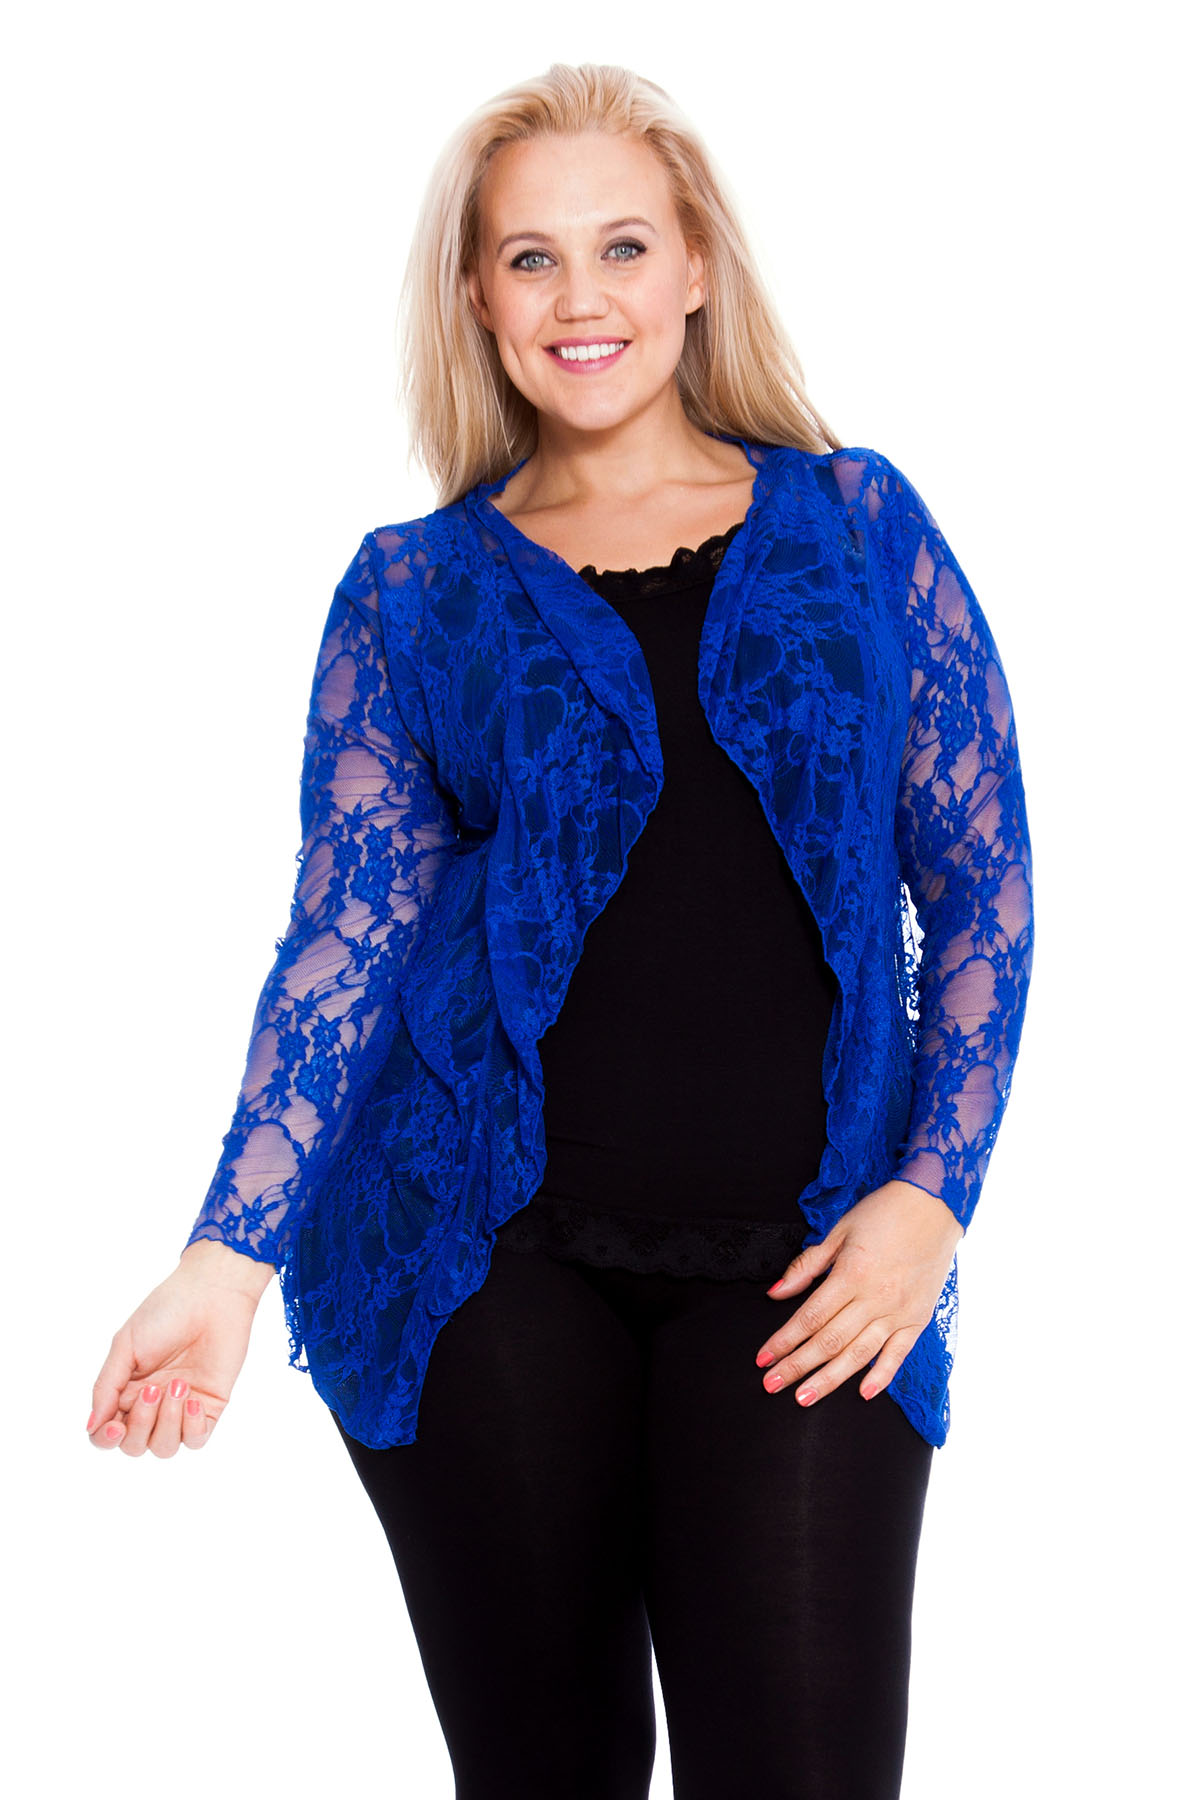 Jose royal blue plus size cardigan sweaters for women store cheap canada, Beautiful dresses to wear to a summer wedding, fruit of the loom cotton t shirts. 